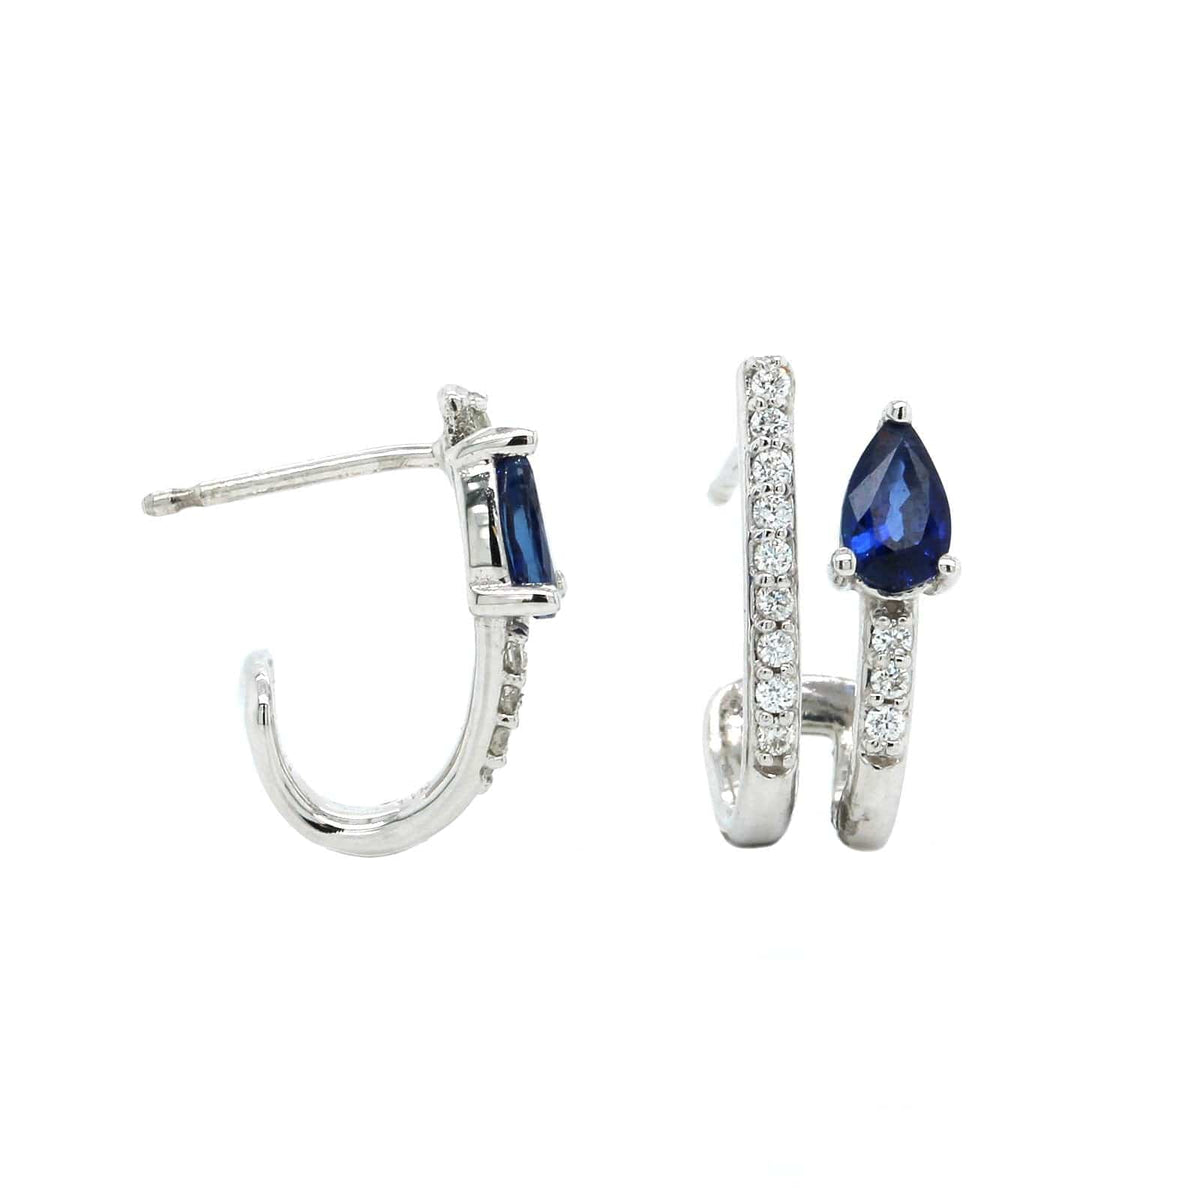 The Janet 14K White Gold 2 Row Diamond and Sapphire Huggie Earrings, 14K White Gold, Long's Jewelers